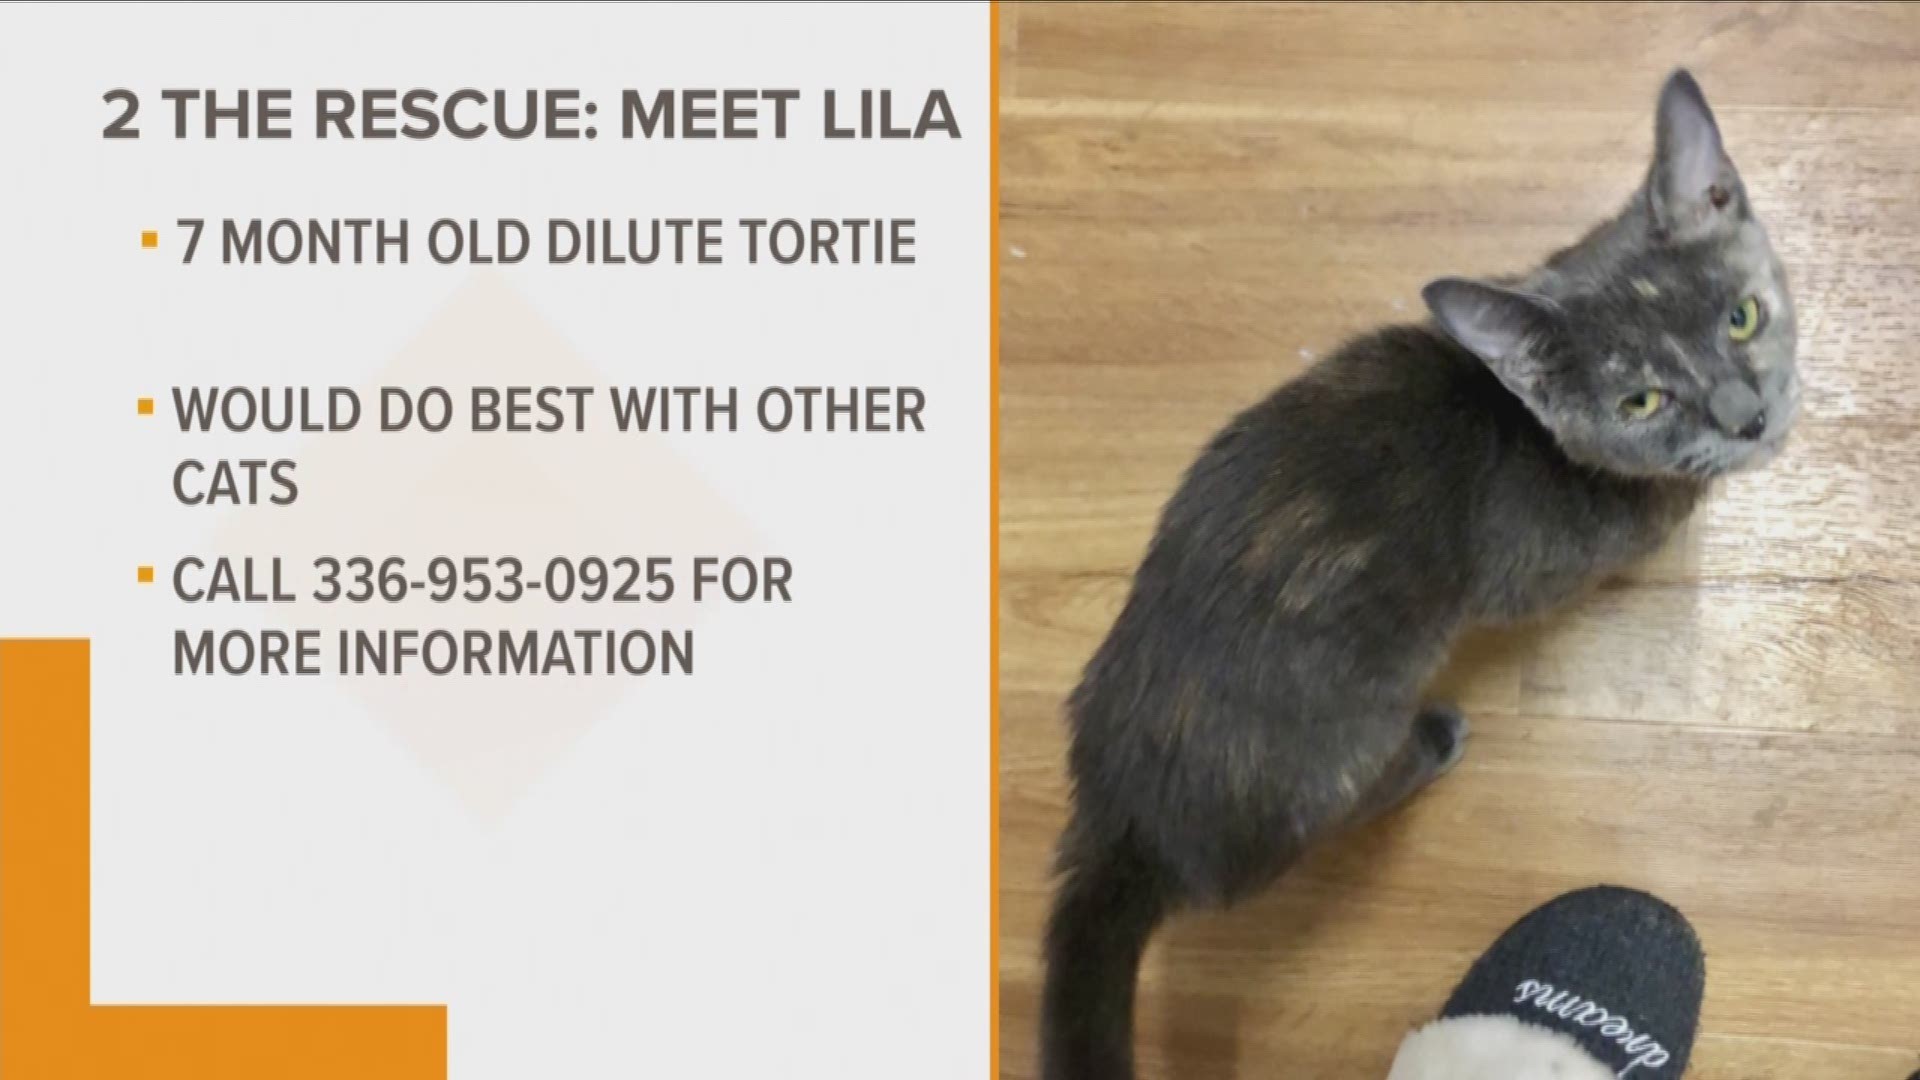 In today's 2 The Rescue segment, we want you to meet Lila. She is at the Animal Awareness Society  waiting for you.